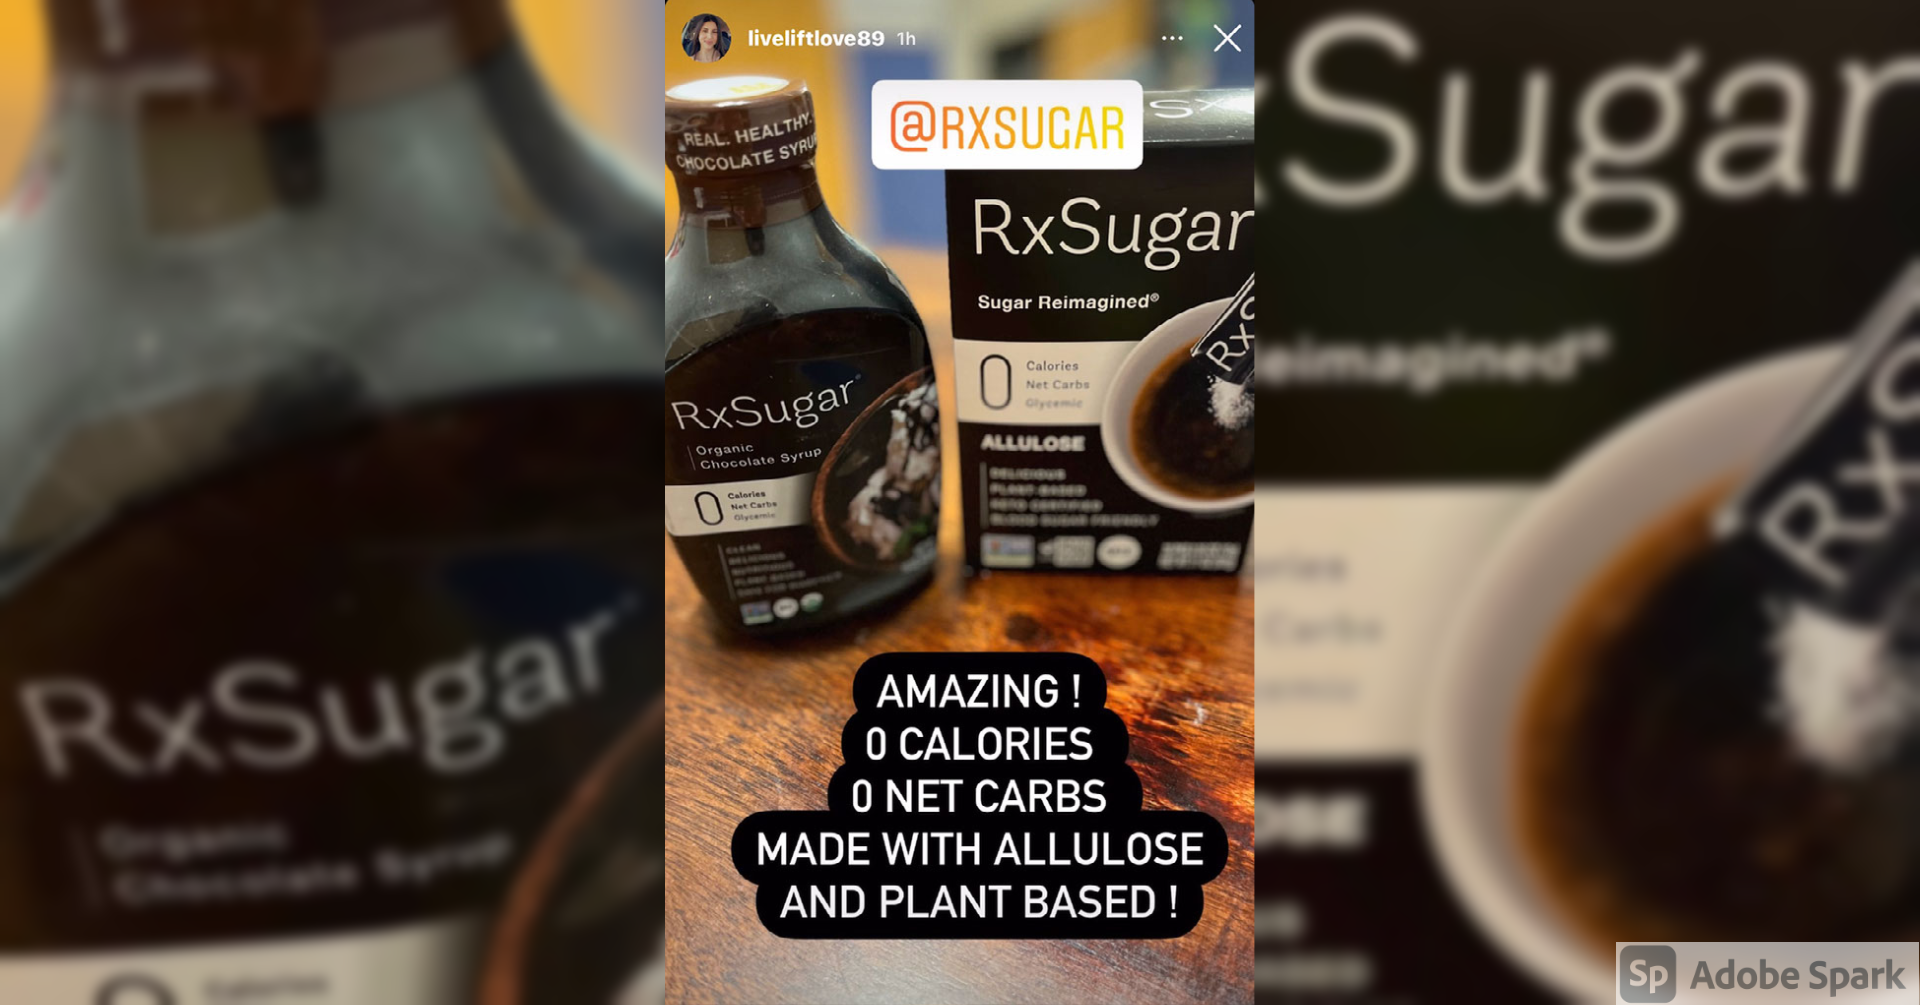 LiveLiftLove89 Showing Love To RxSugar With Her Knew Product